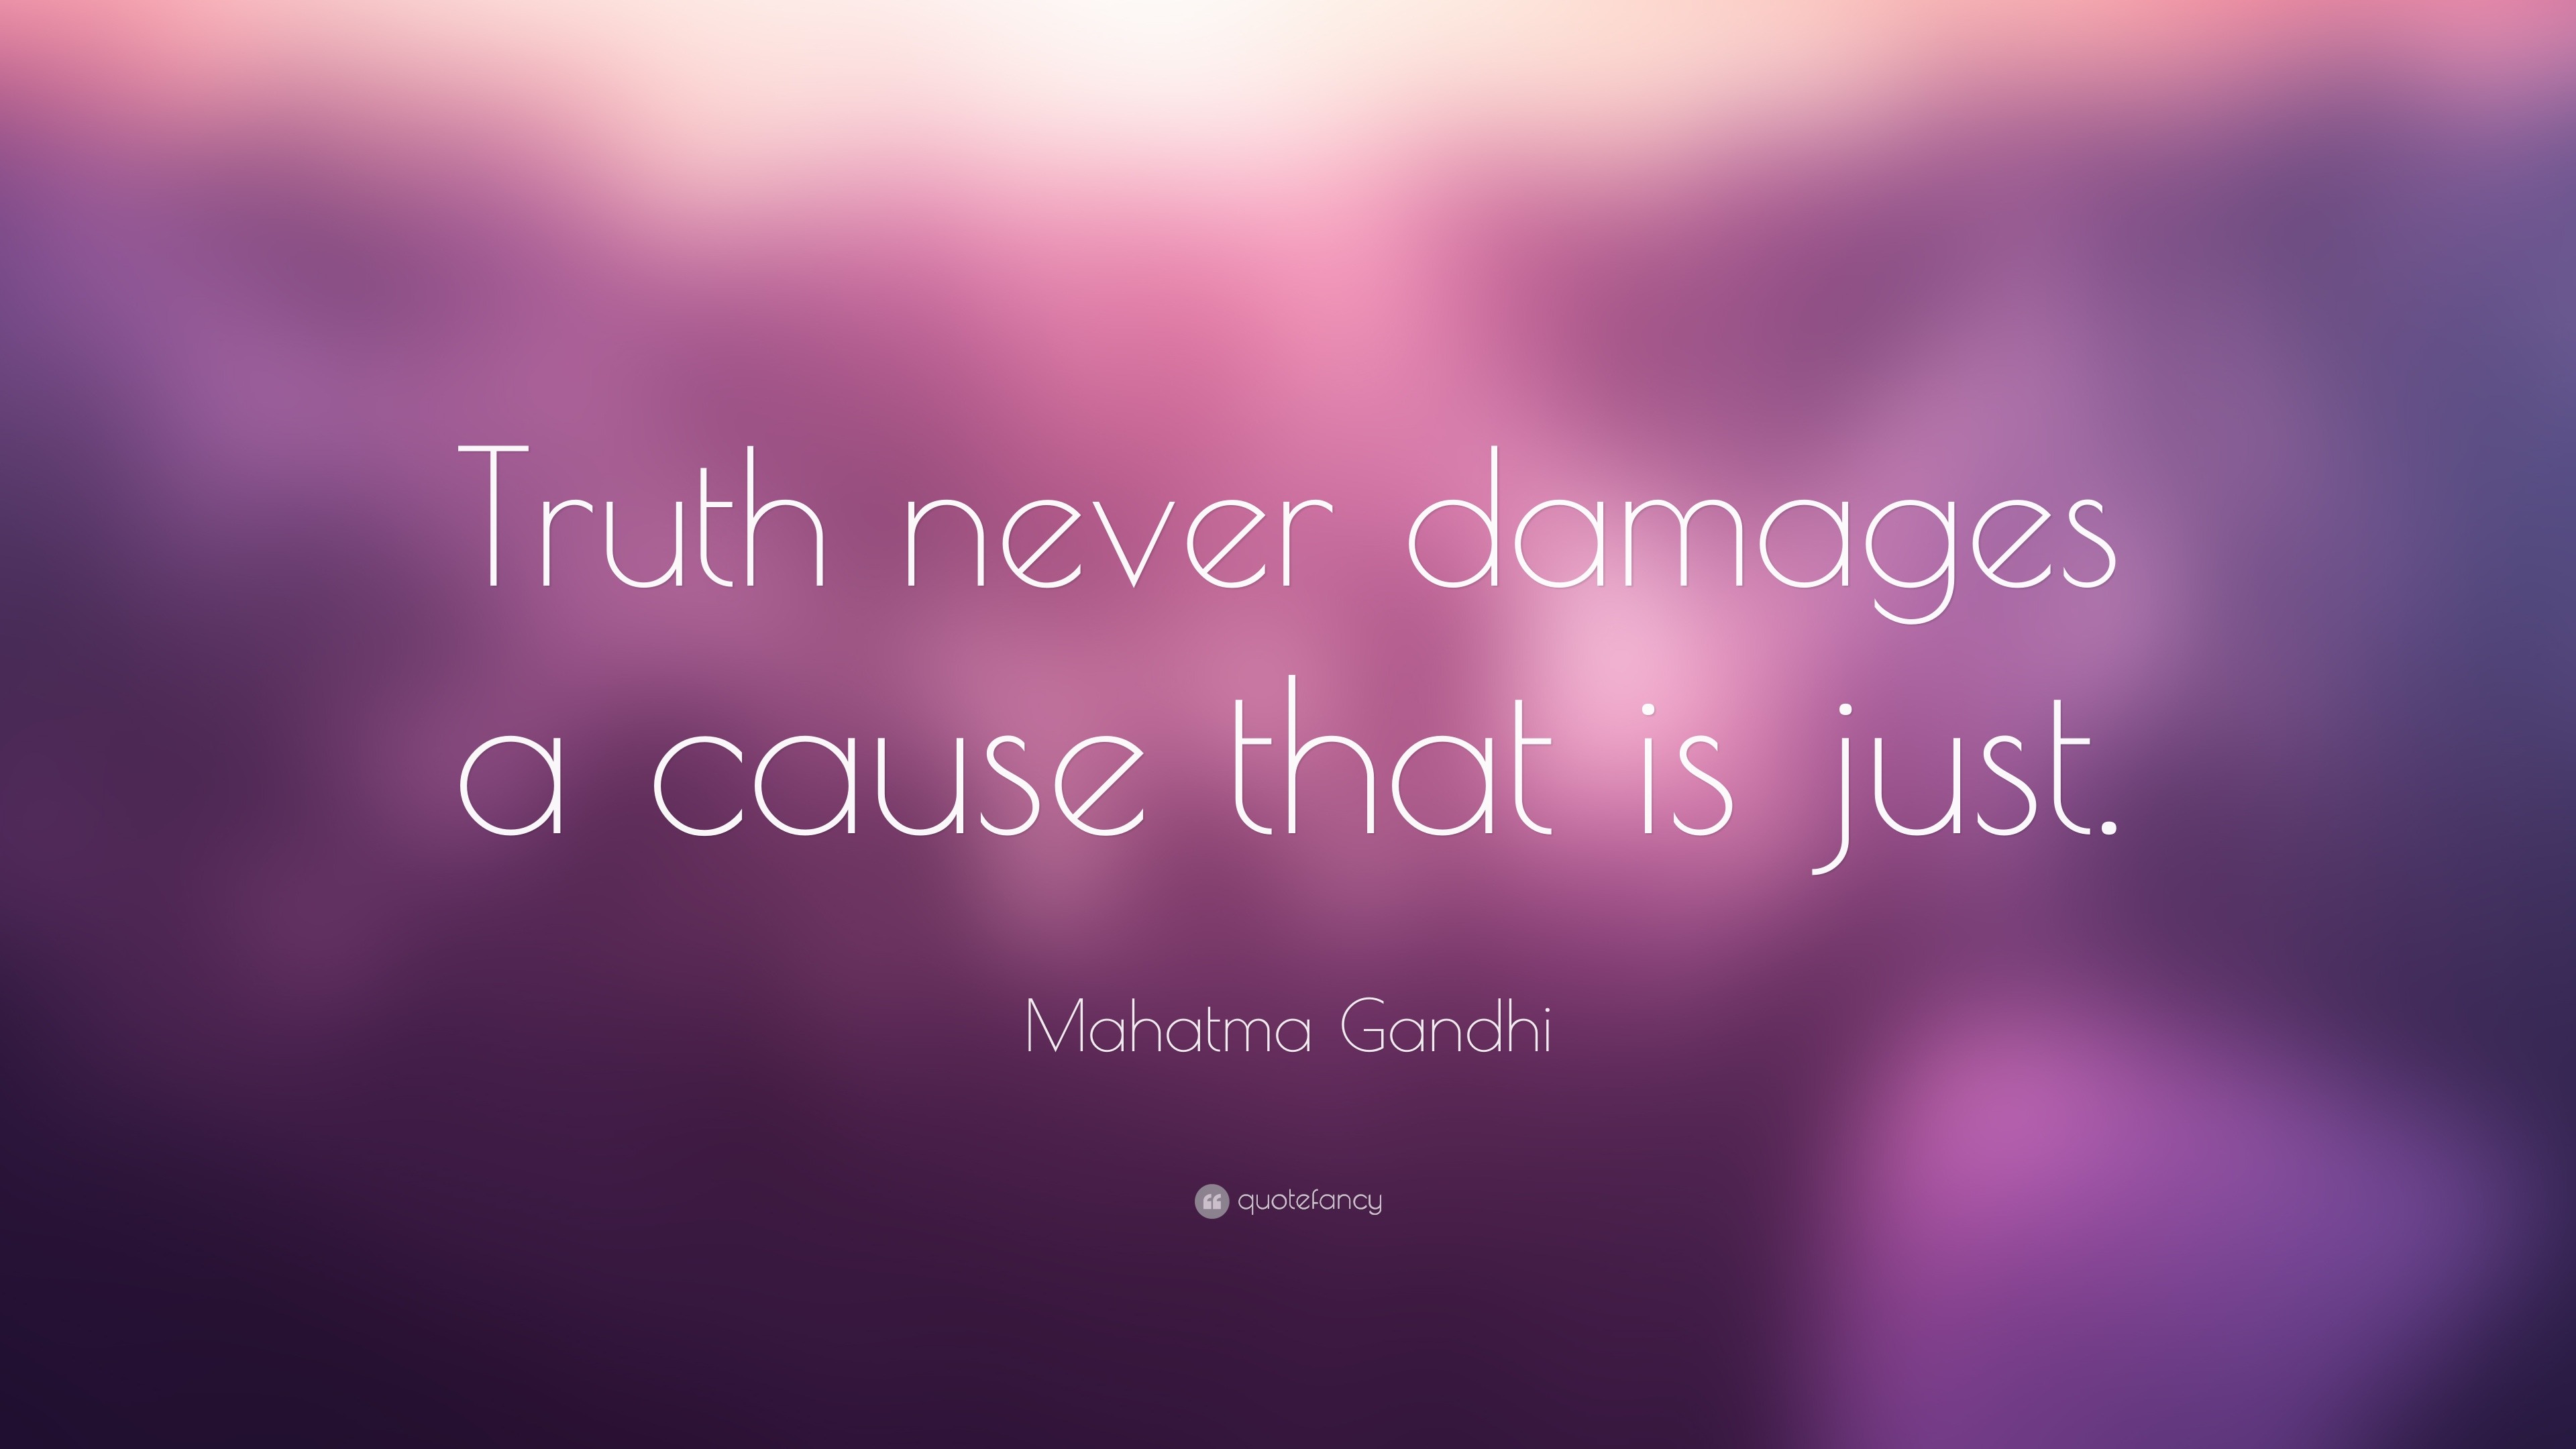 Mahatma Gandhi Quote: "Truth never damages a cause that is just."